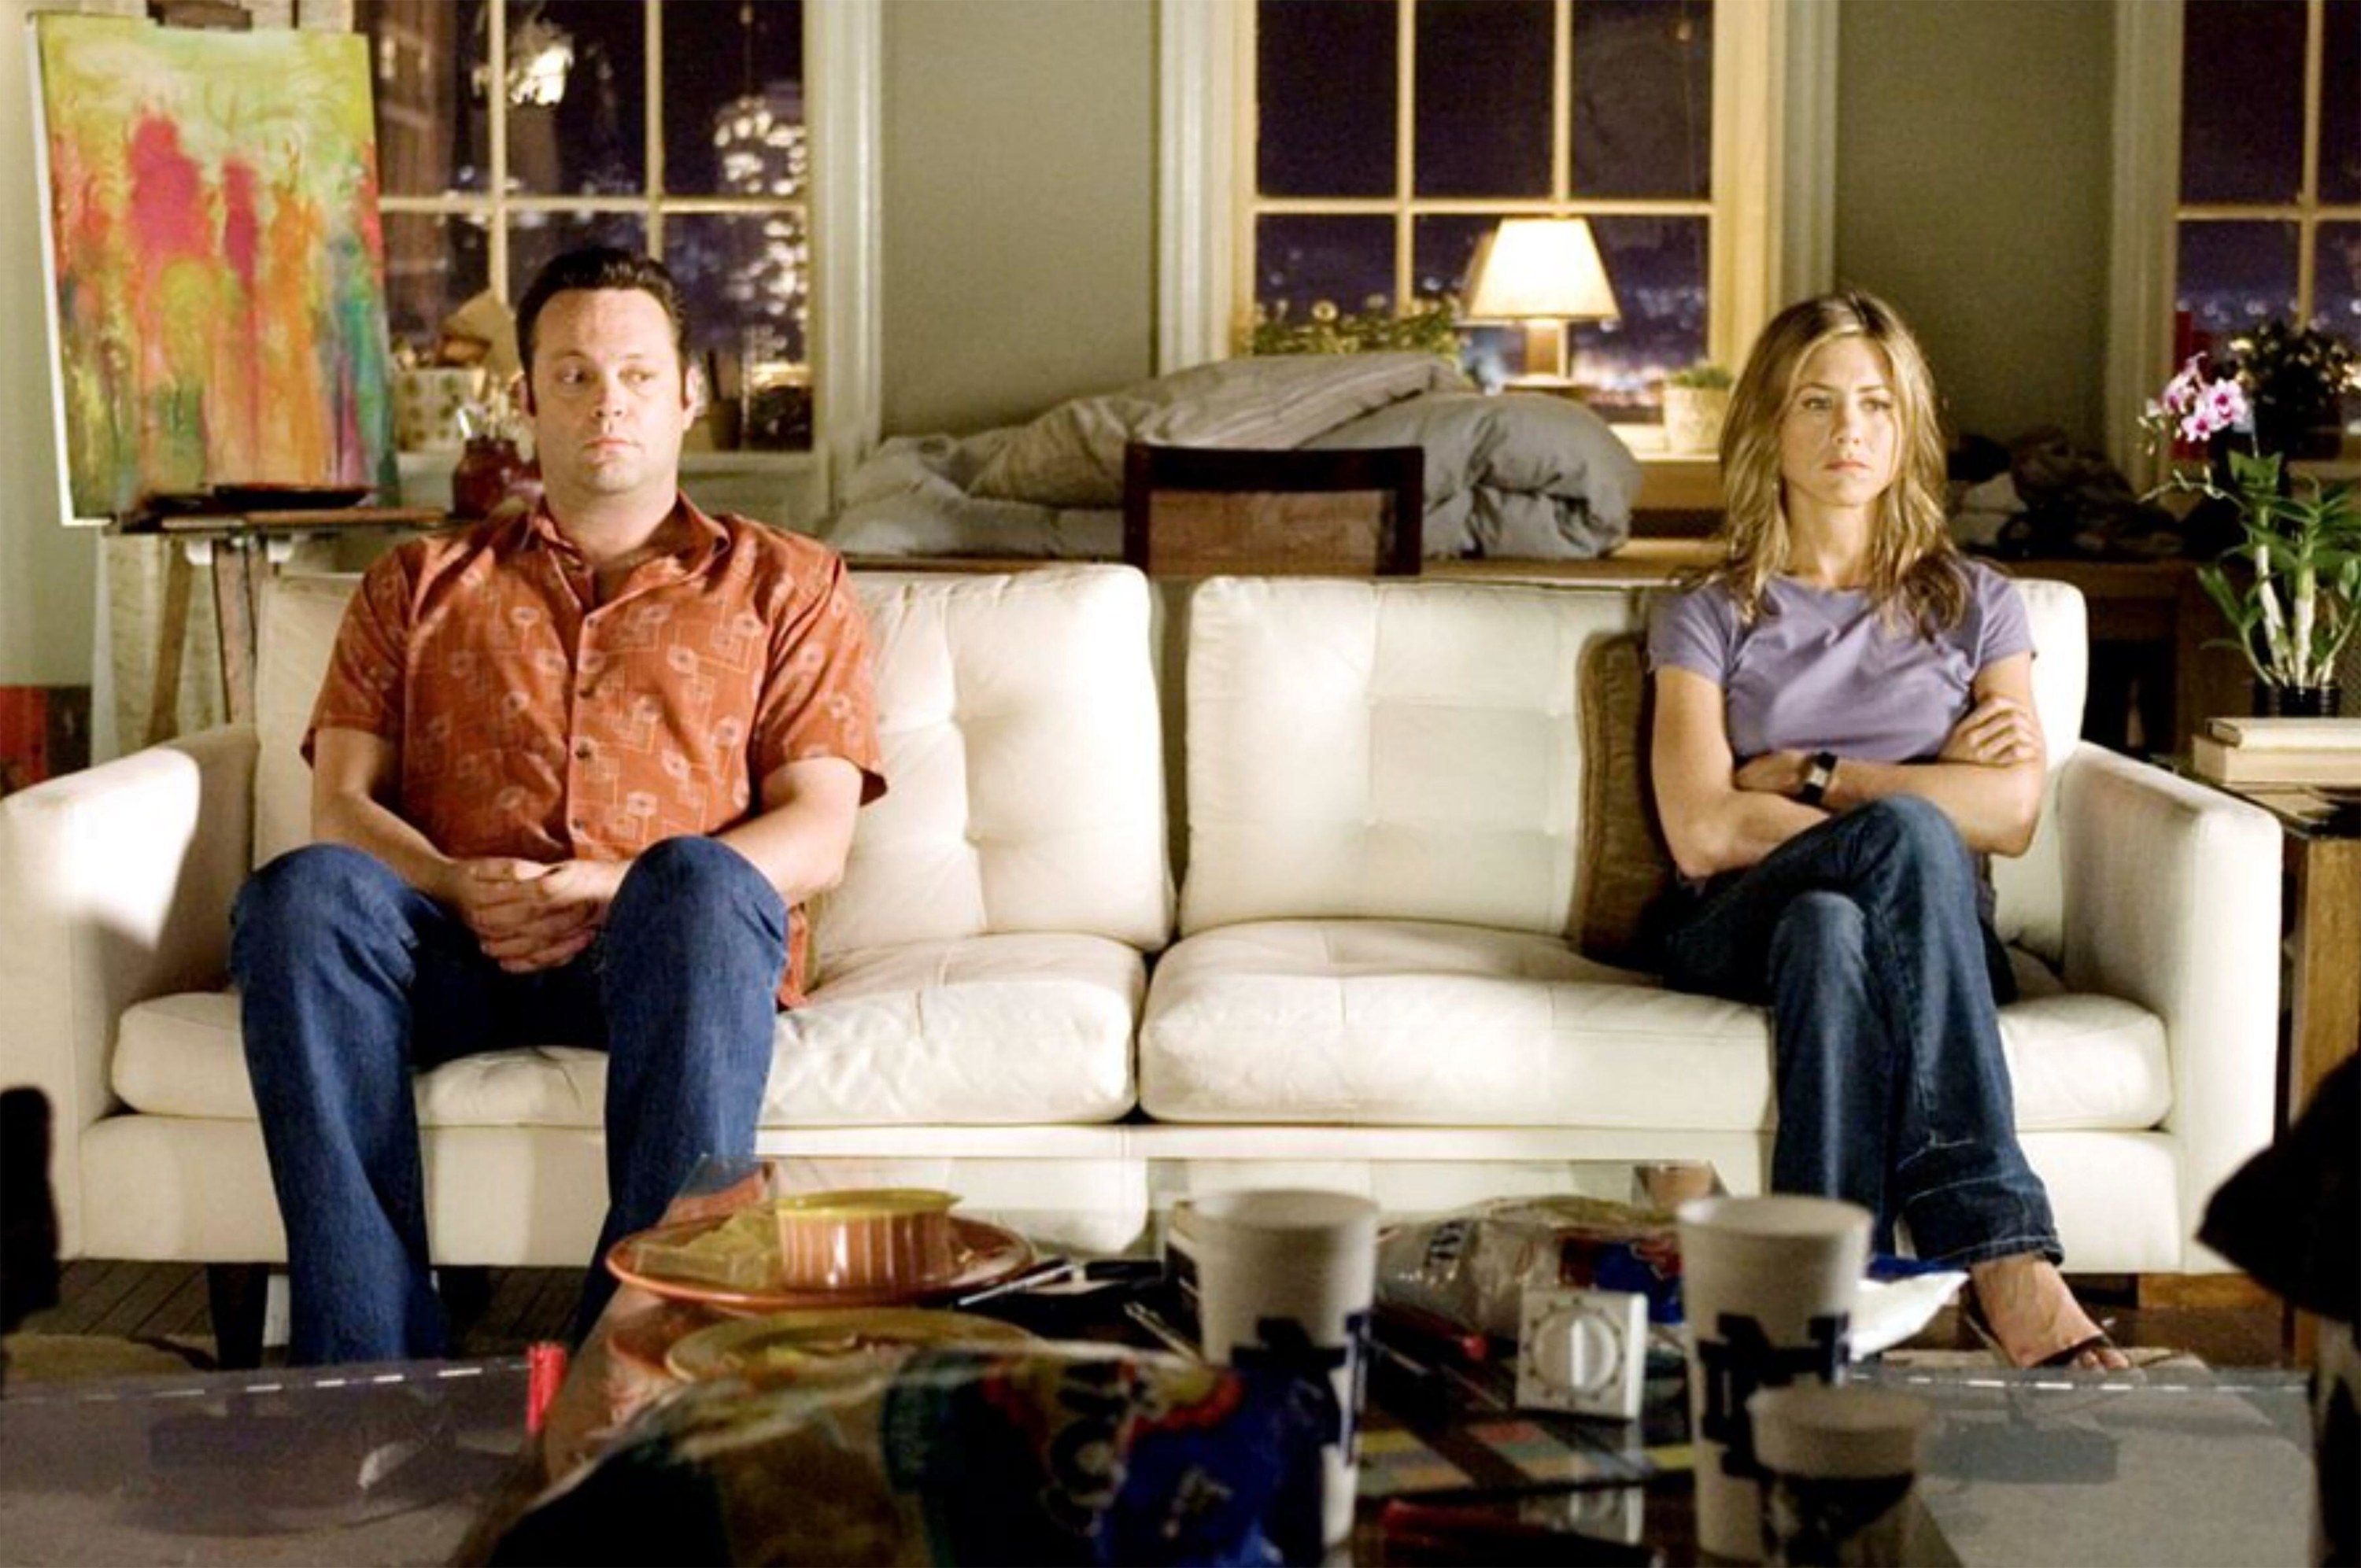 Jennifer Aniston and Vince Vaughn in “The Break Up”